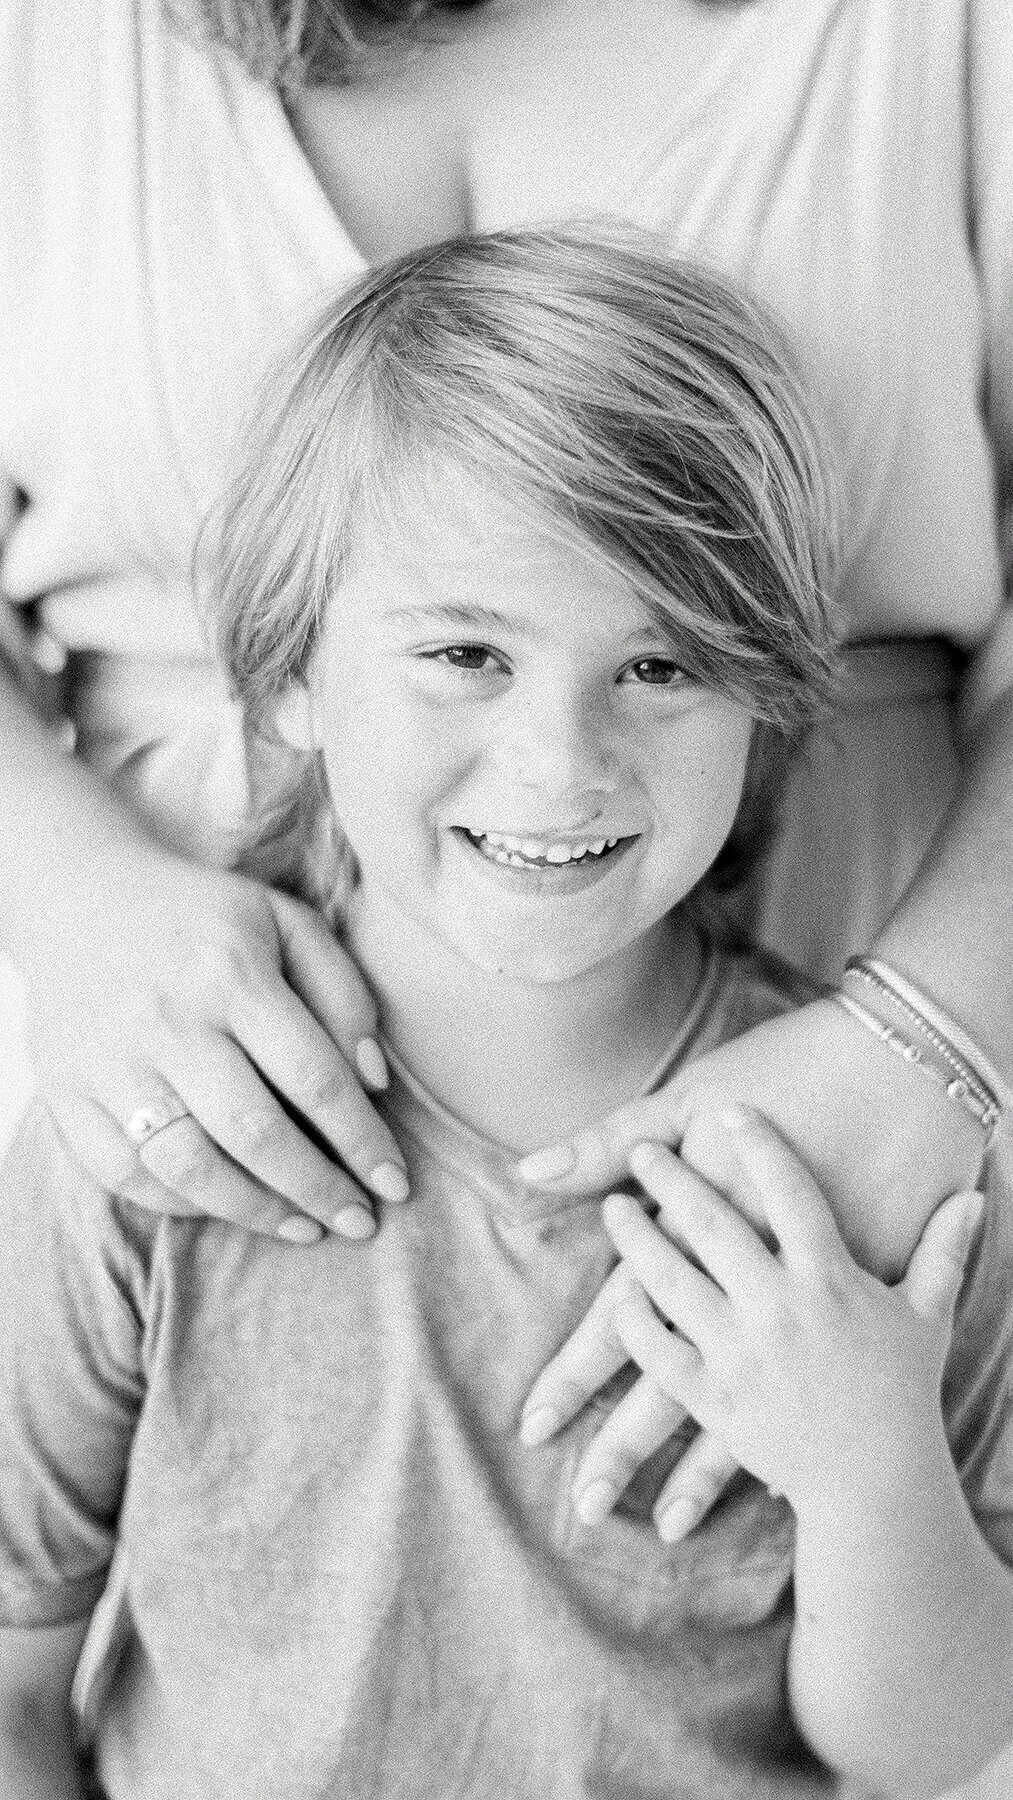 Close up black and white portrait of a young boy looking at the camera smiling for his in studio family session.